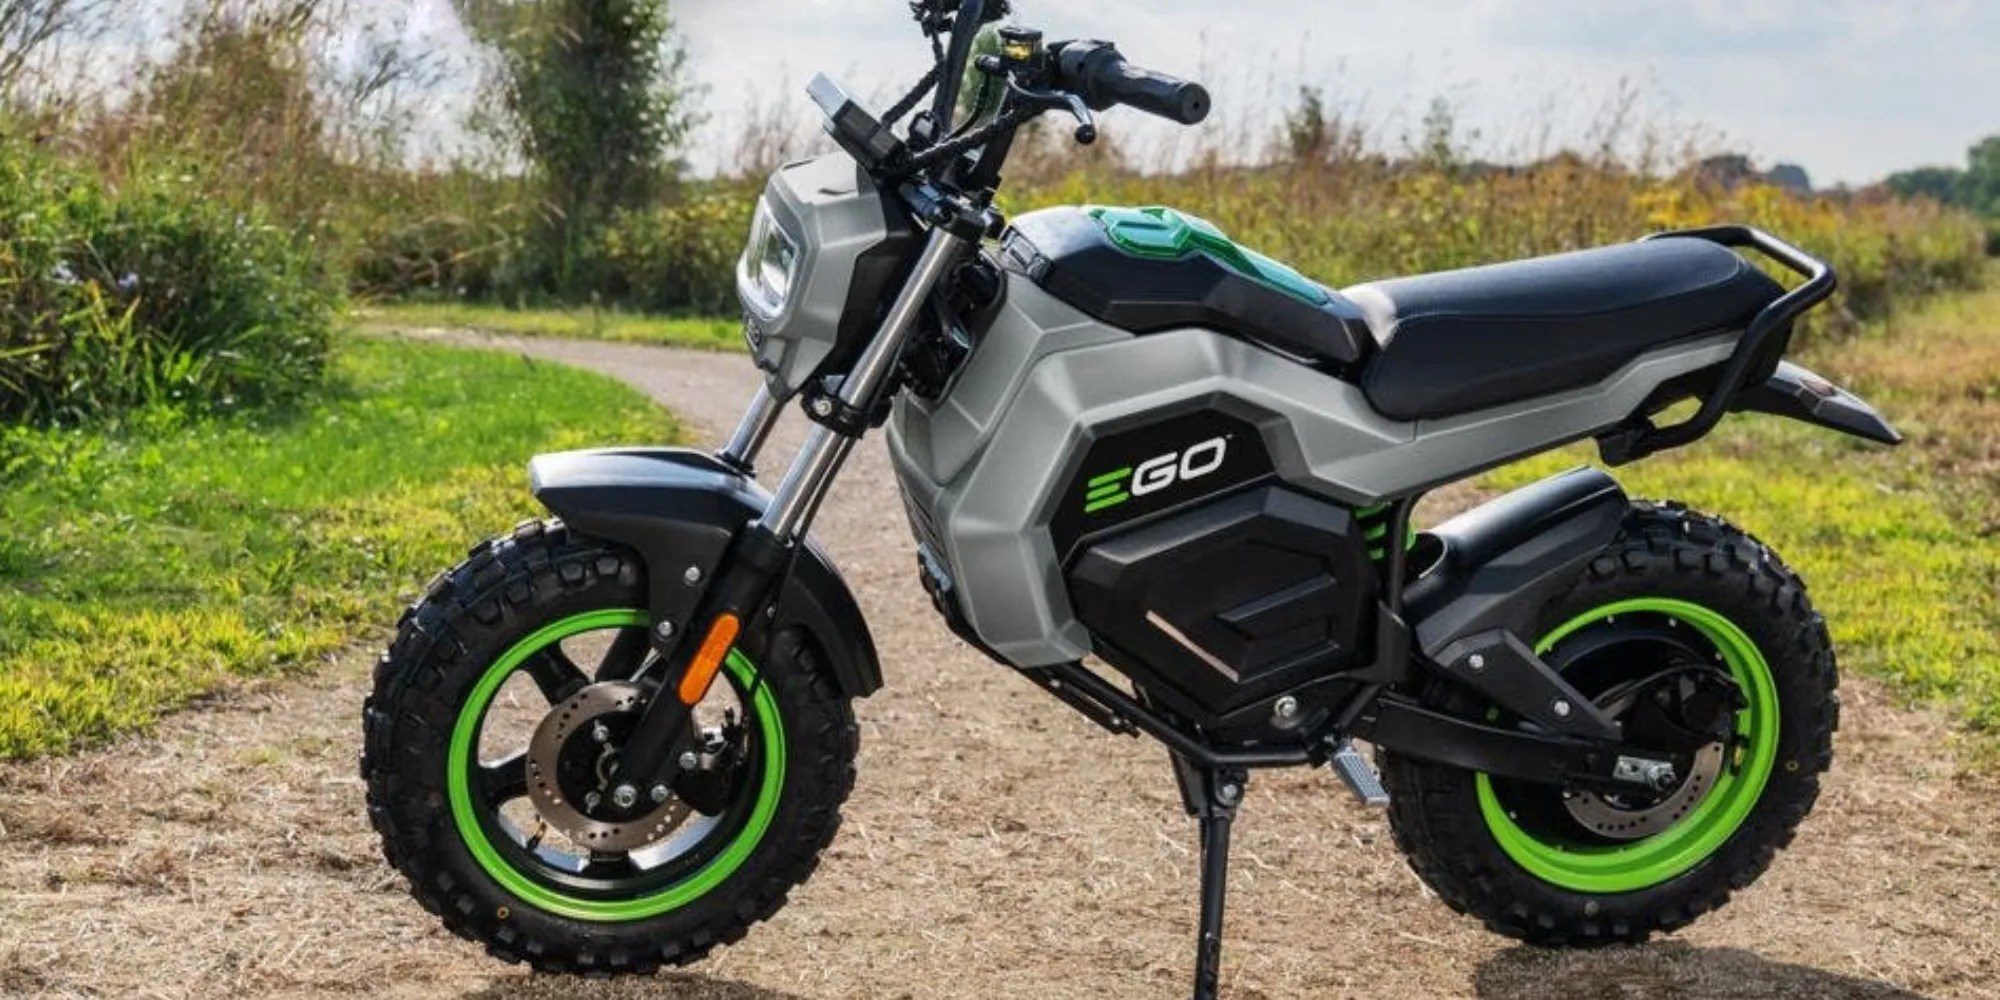 EGO Power+ Electric Mini Bike on dirt road within post for Rad Powers flash sale